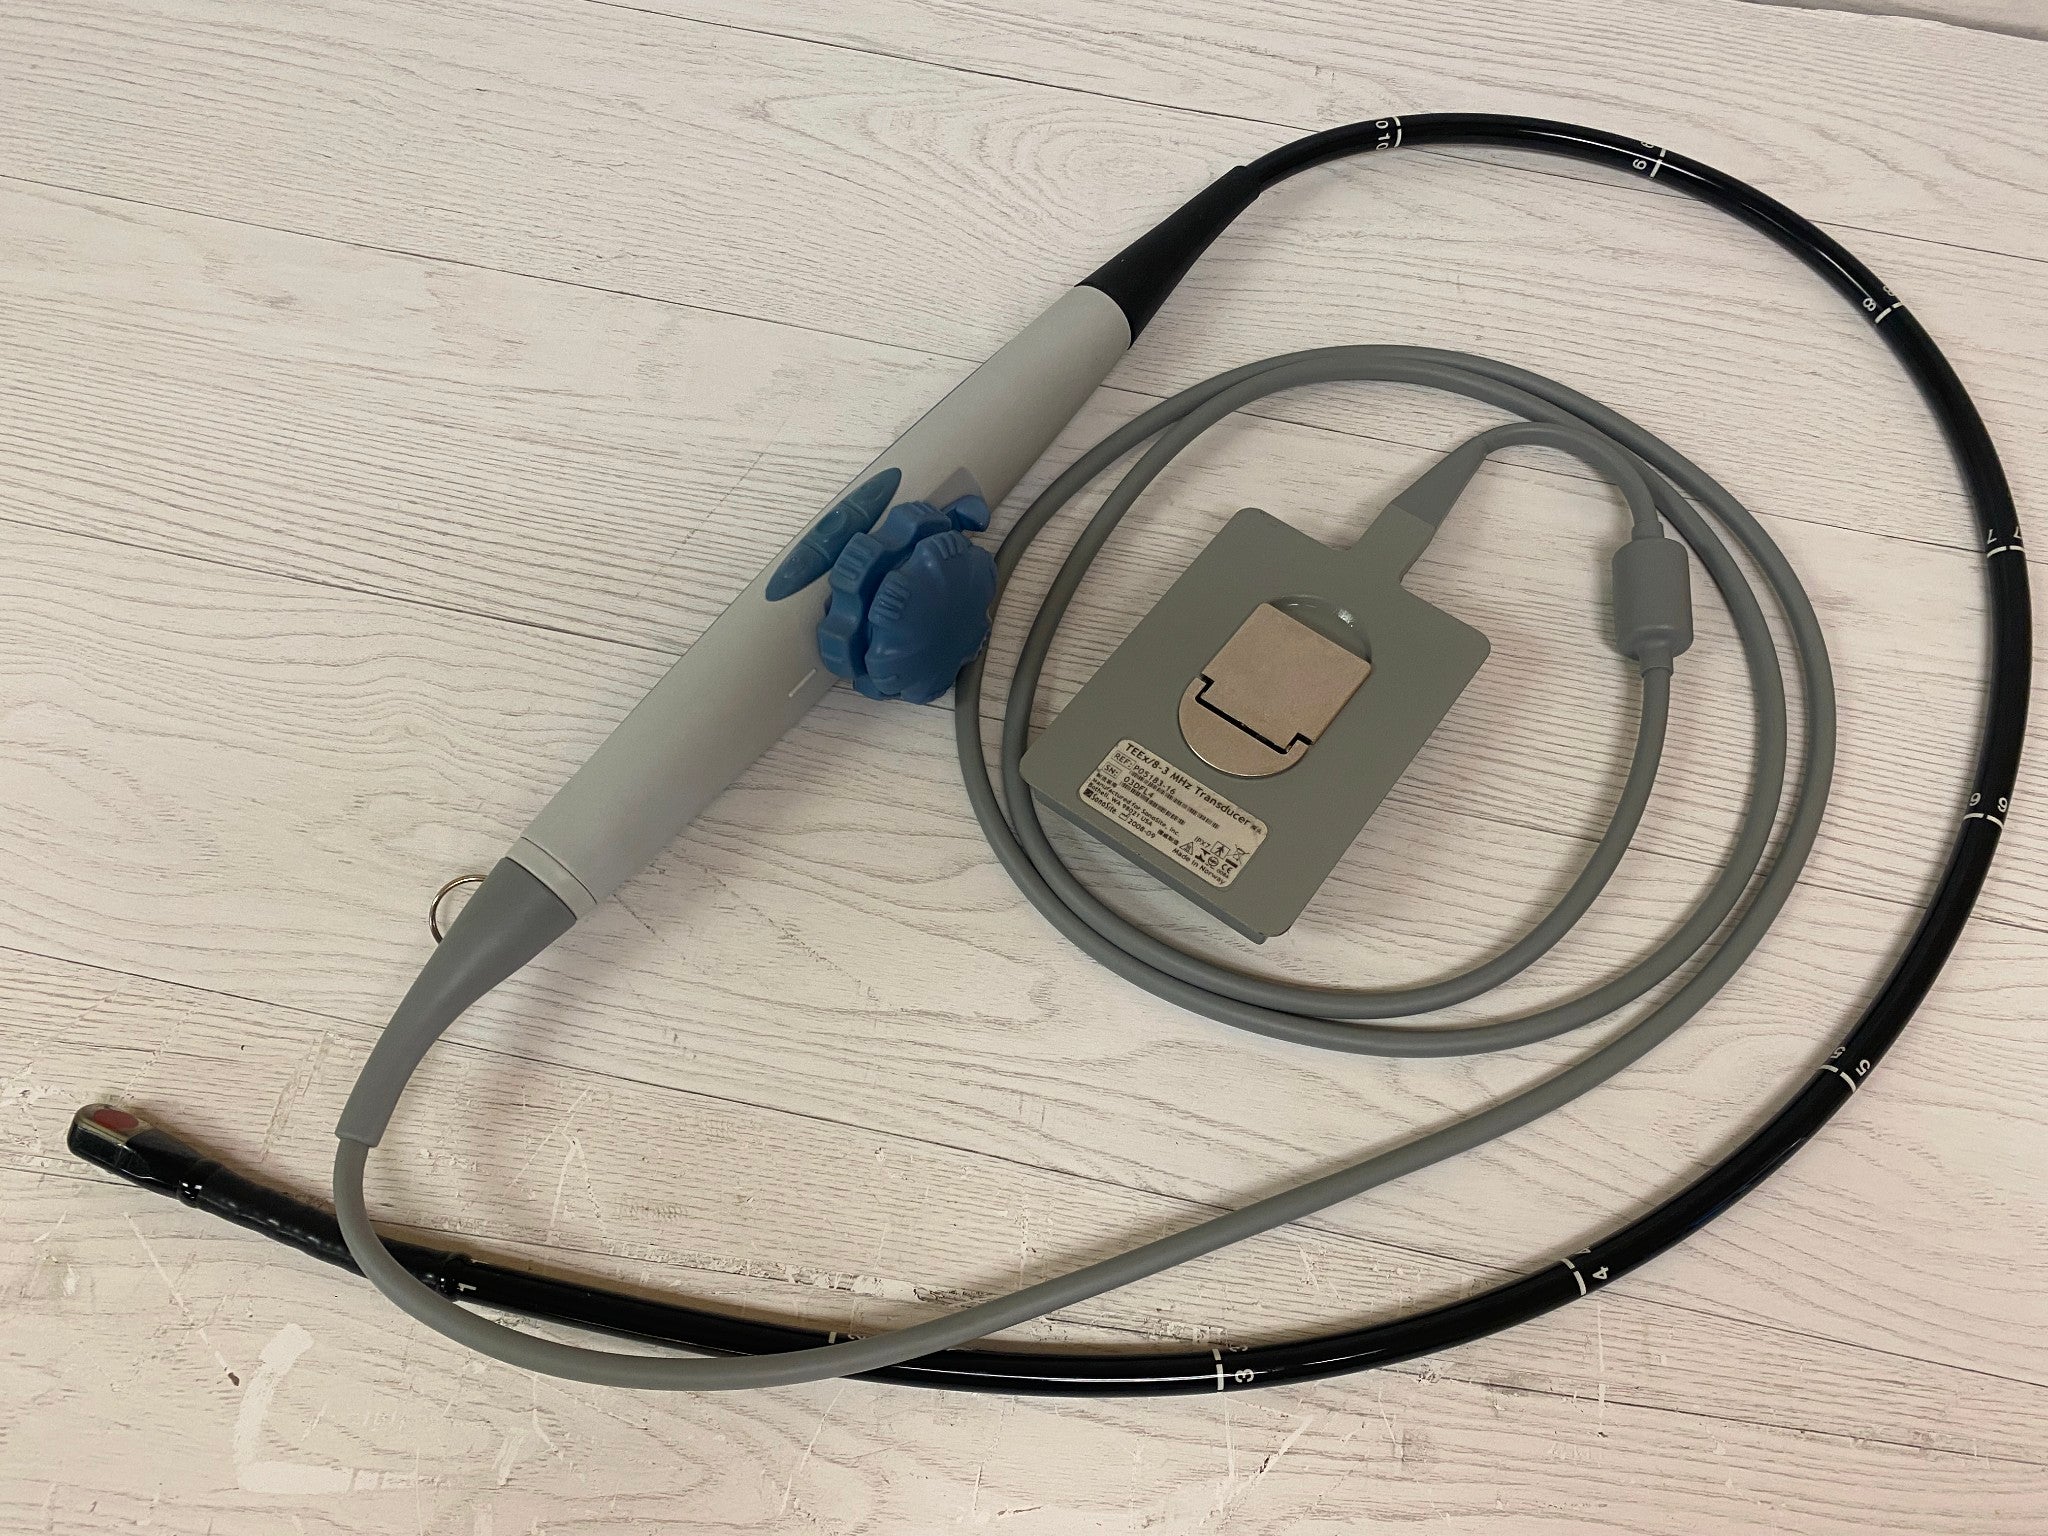 Sonosite TEEx 8-3 MHz. Ultrasound Probe Transducer Made 2008 in Norway DIAGNOSTIC ULTRASOUND MACHINES FOR SALE